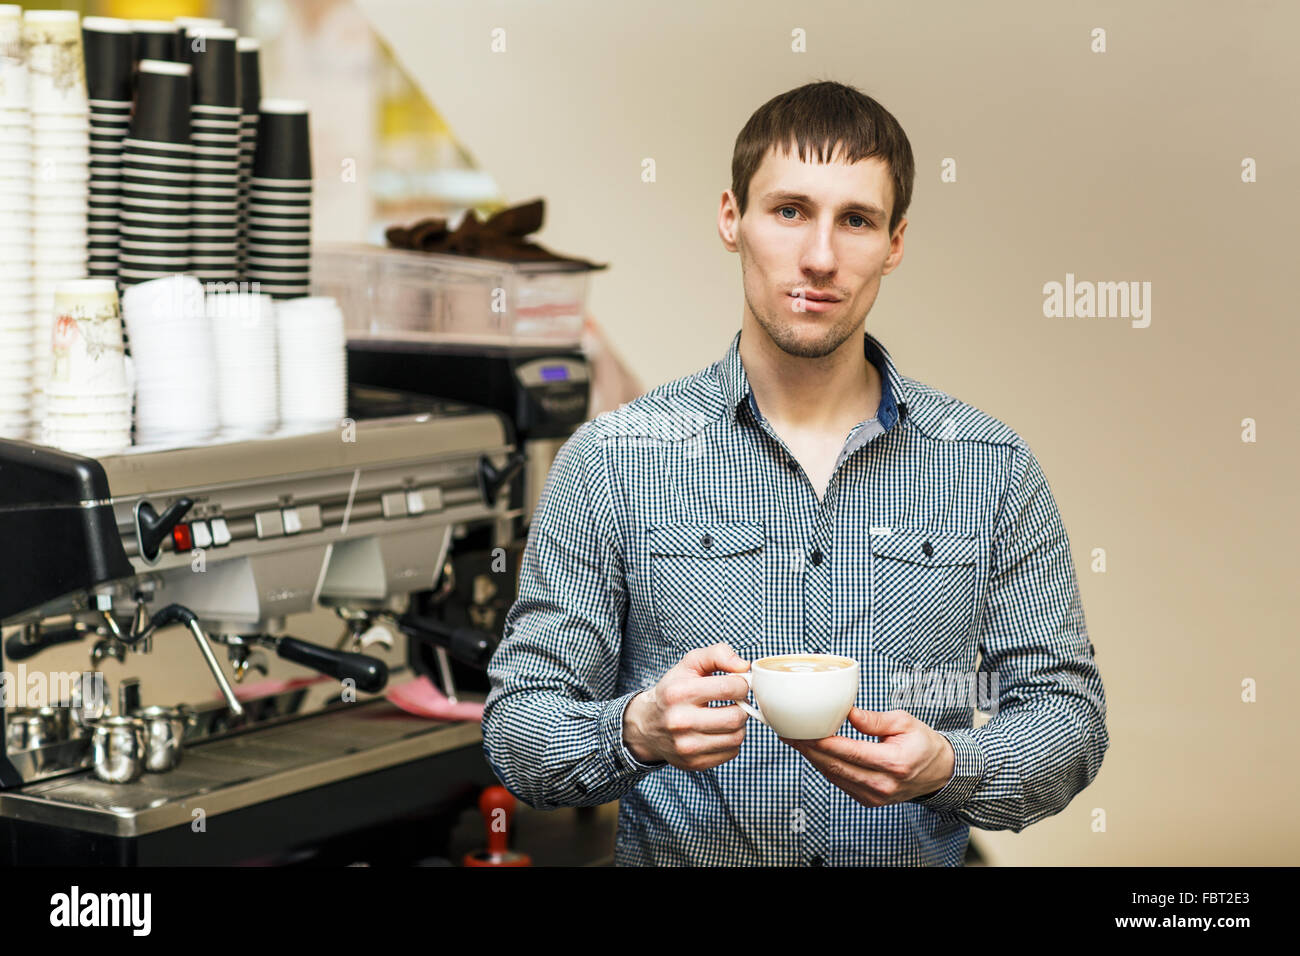 Young barista standing coffee maker on background Stock Photo